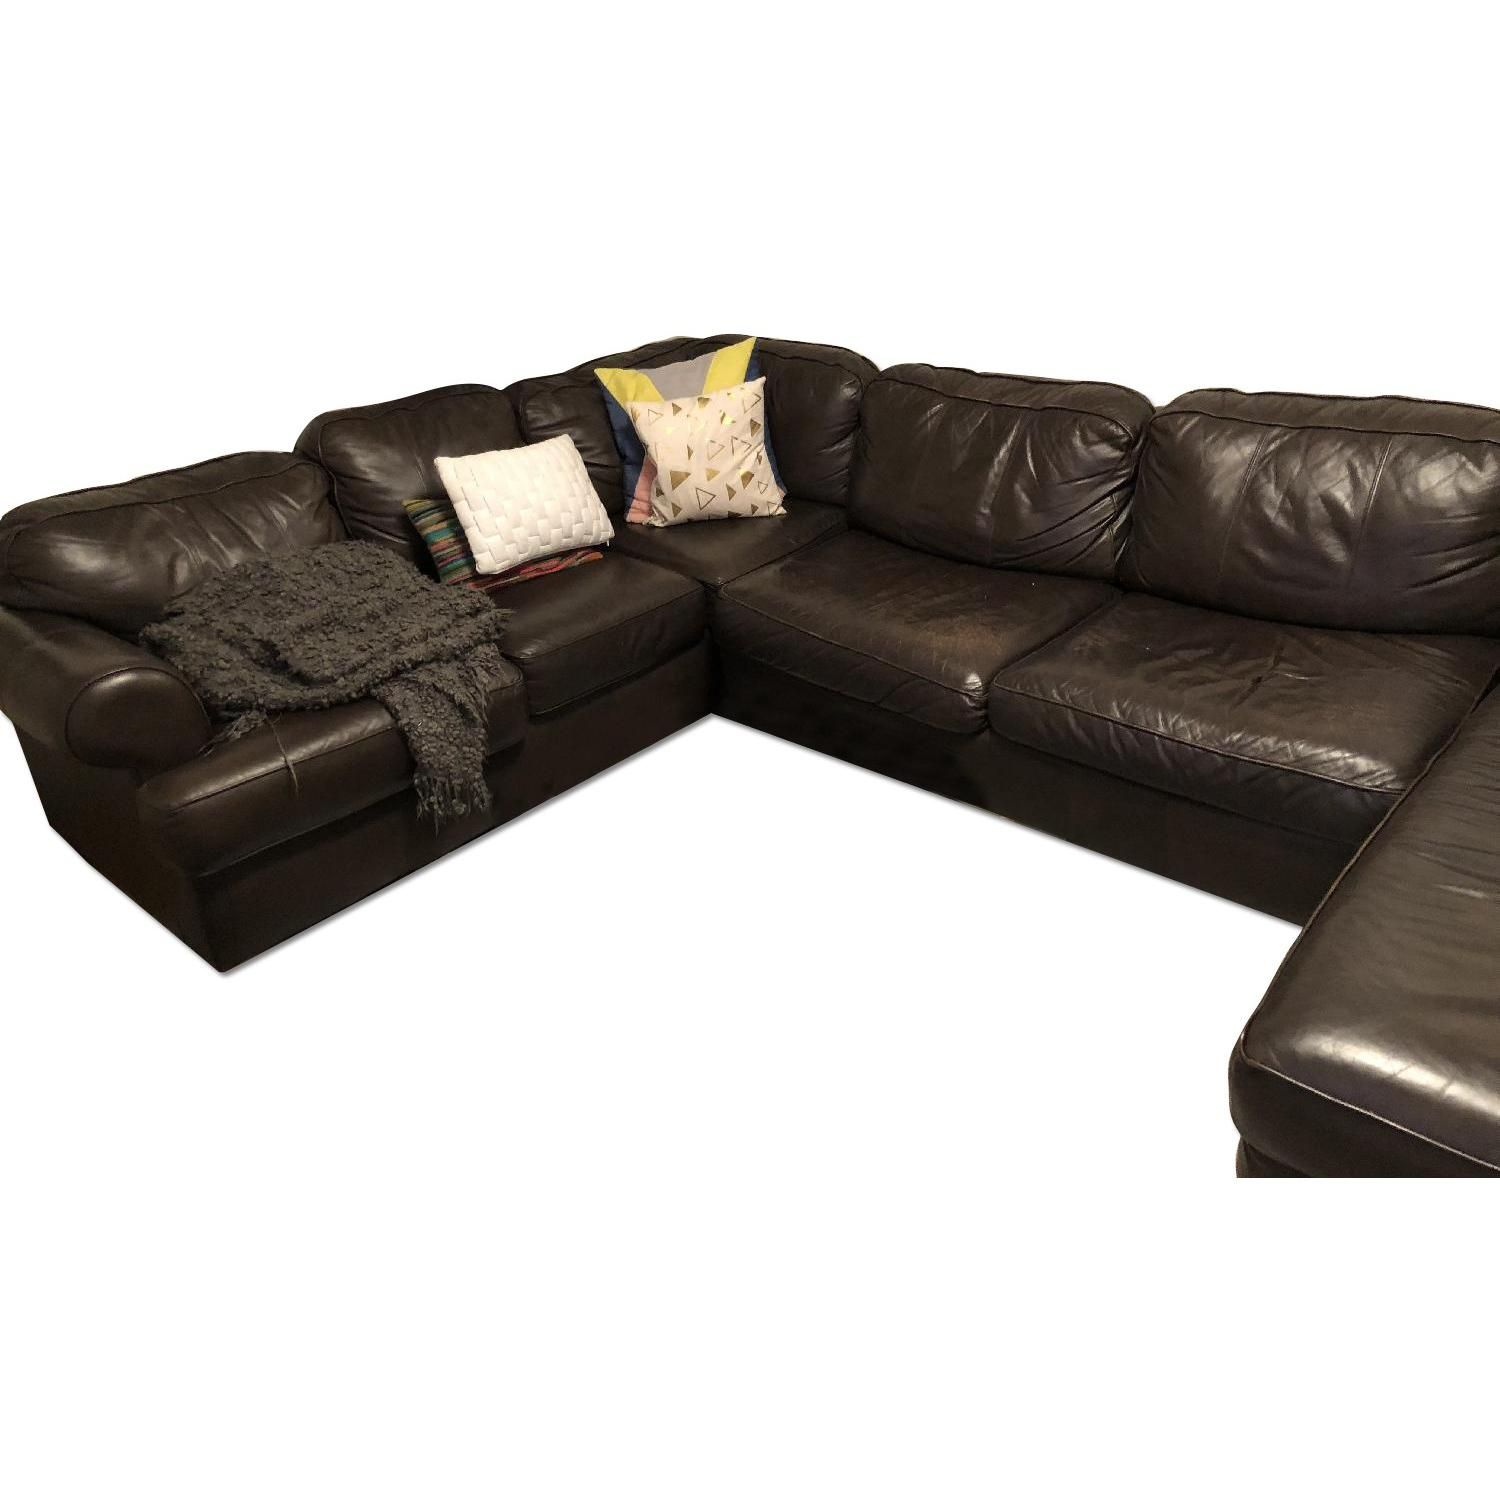 Jennifer Convertibles Leather 3 Piece Sleeper Sectional Sofa – Aptdeco Intended For 3 Seat Convertible Sectional Sofas (Gallery 13 of 20)